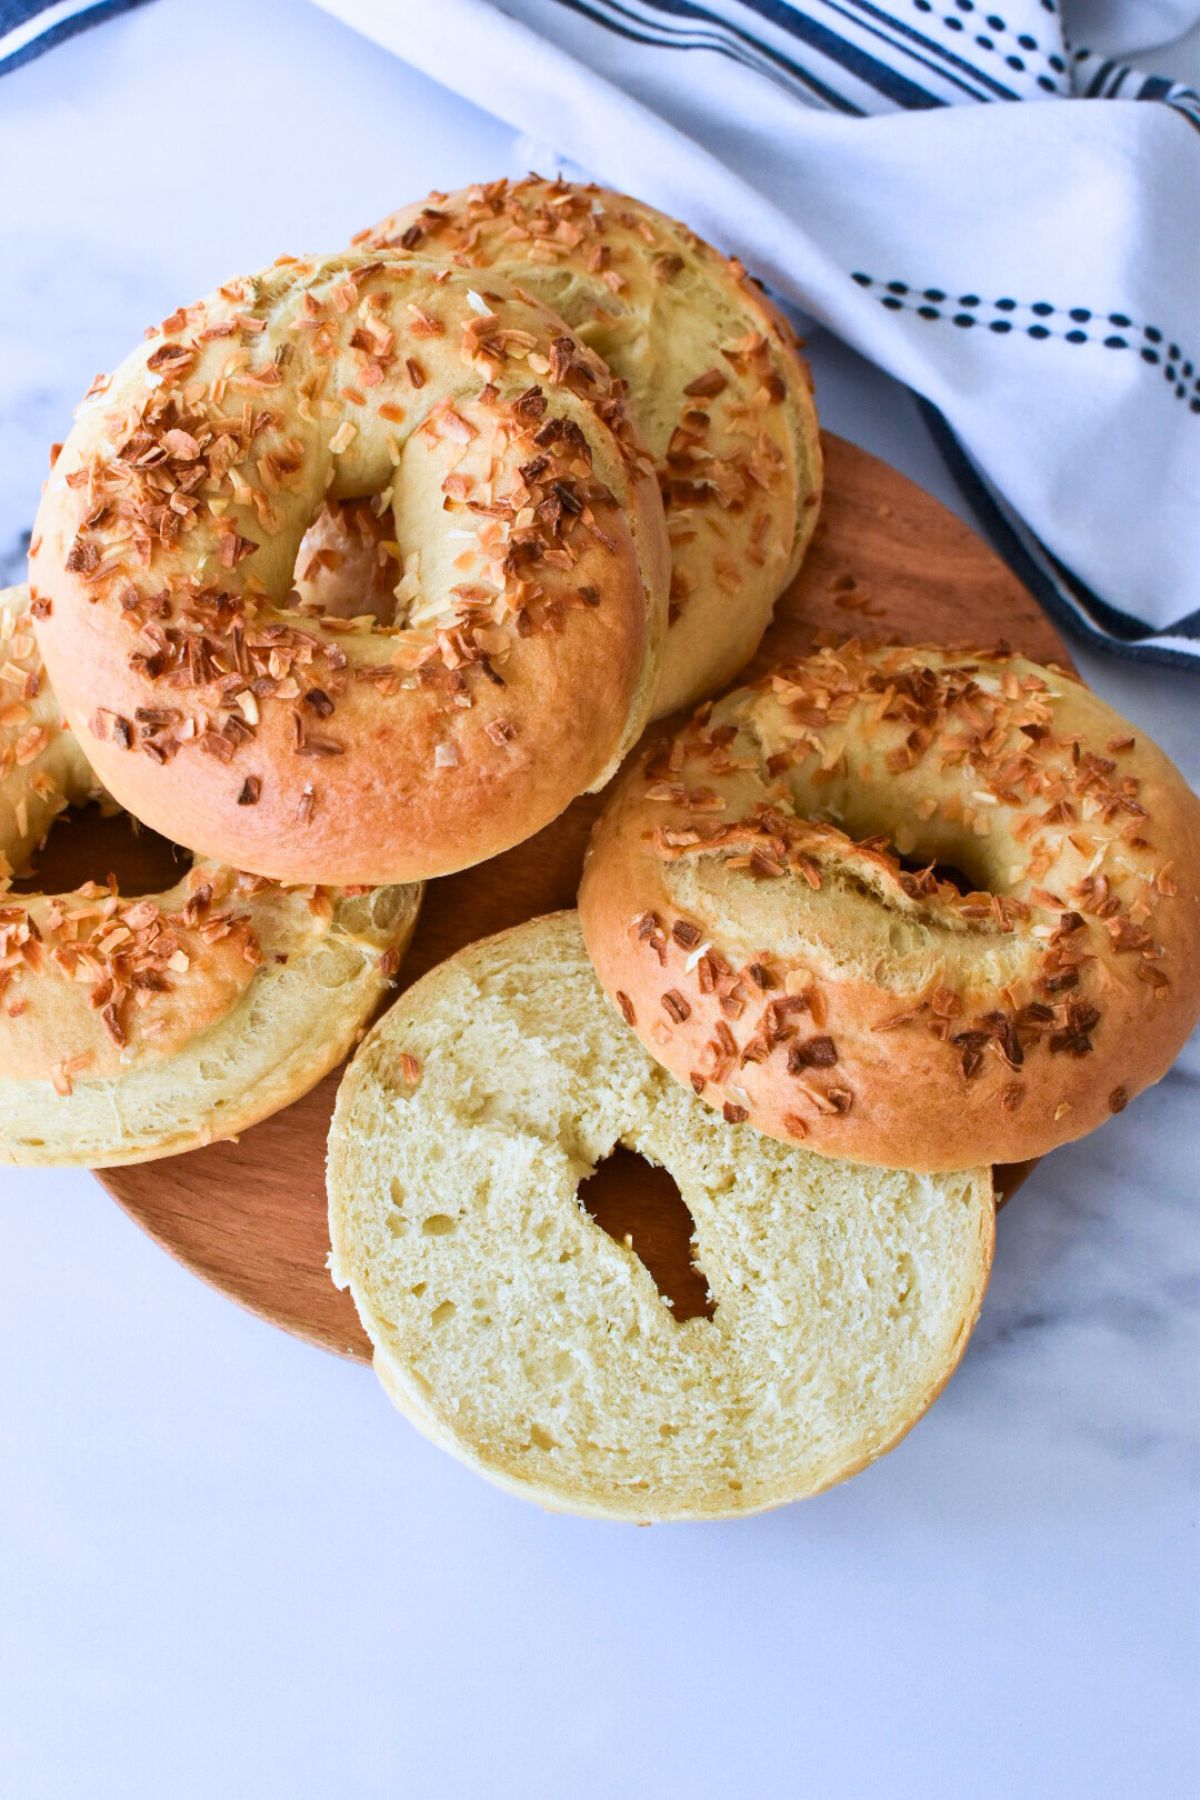 Onion bagels on a wooden plate and one is sliced in half to show the crumb.